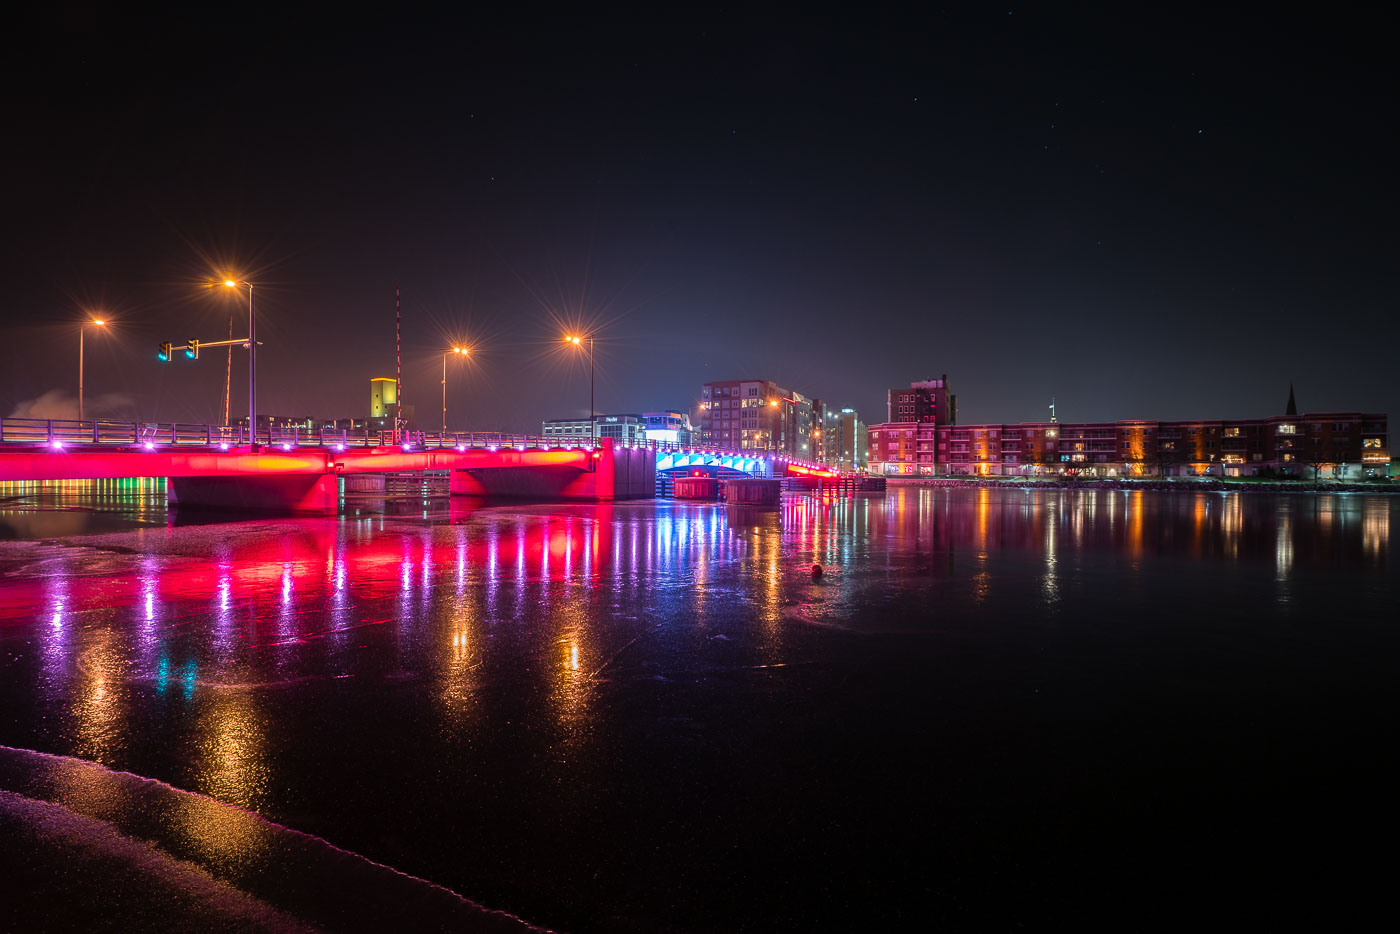 Lit up bridge over the fox river at night